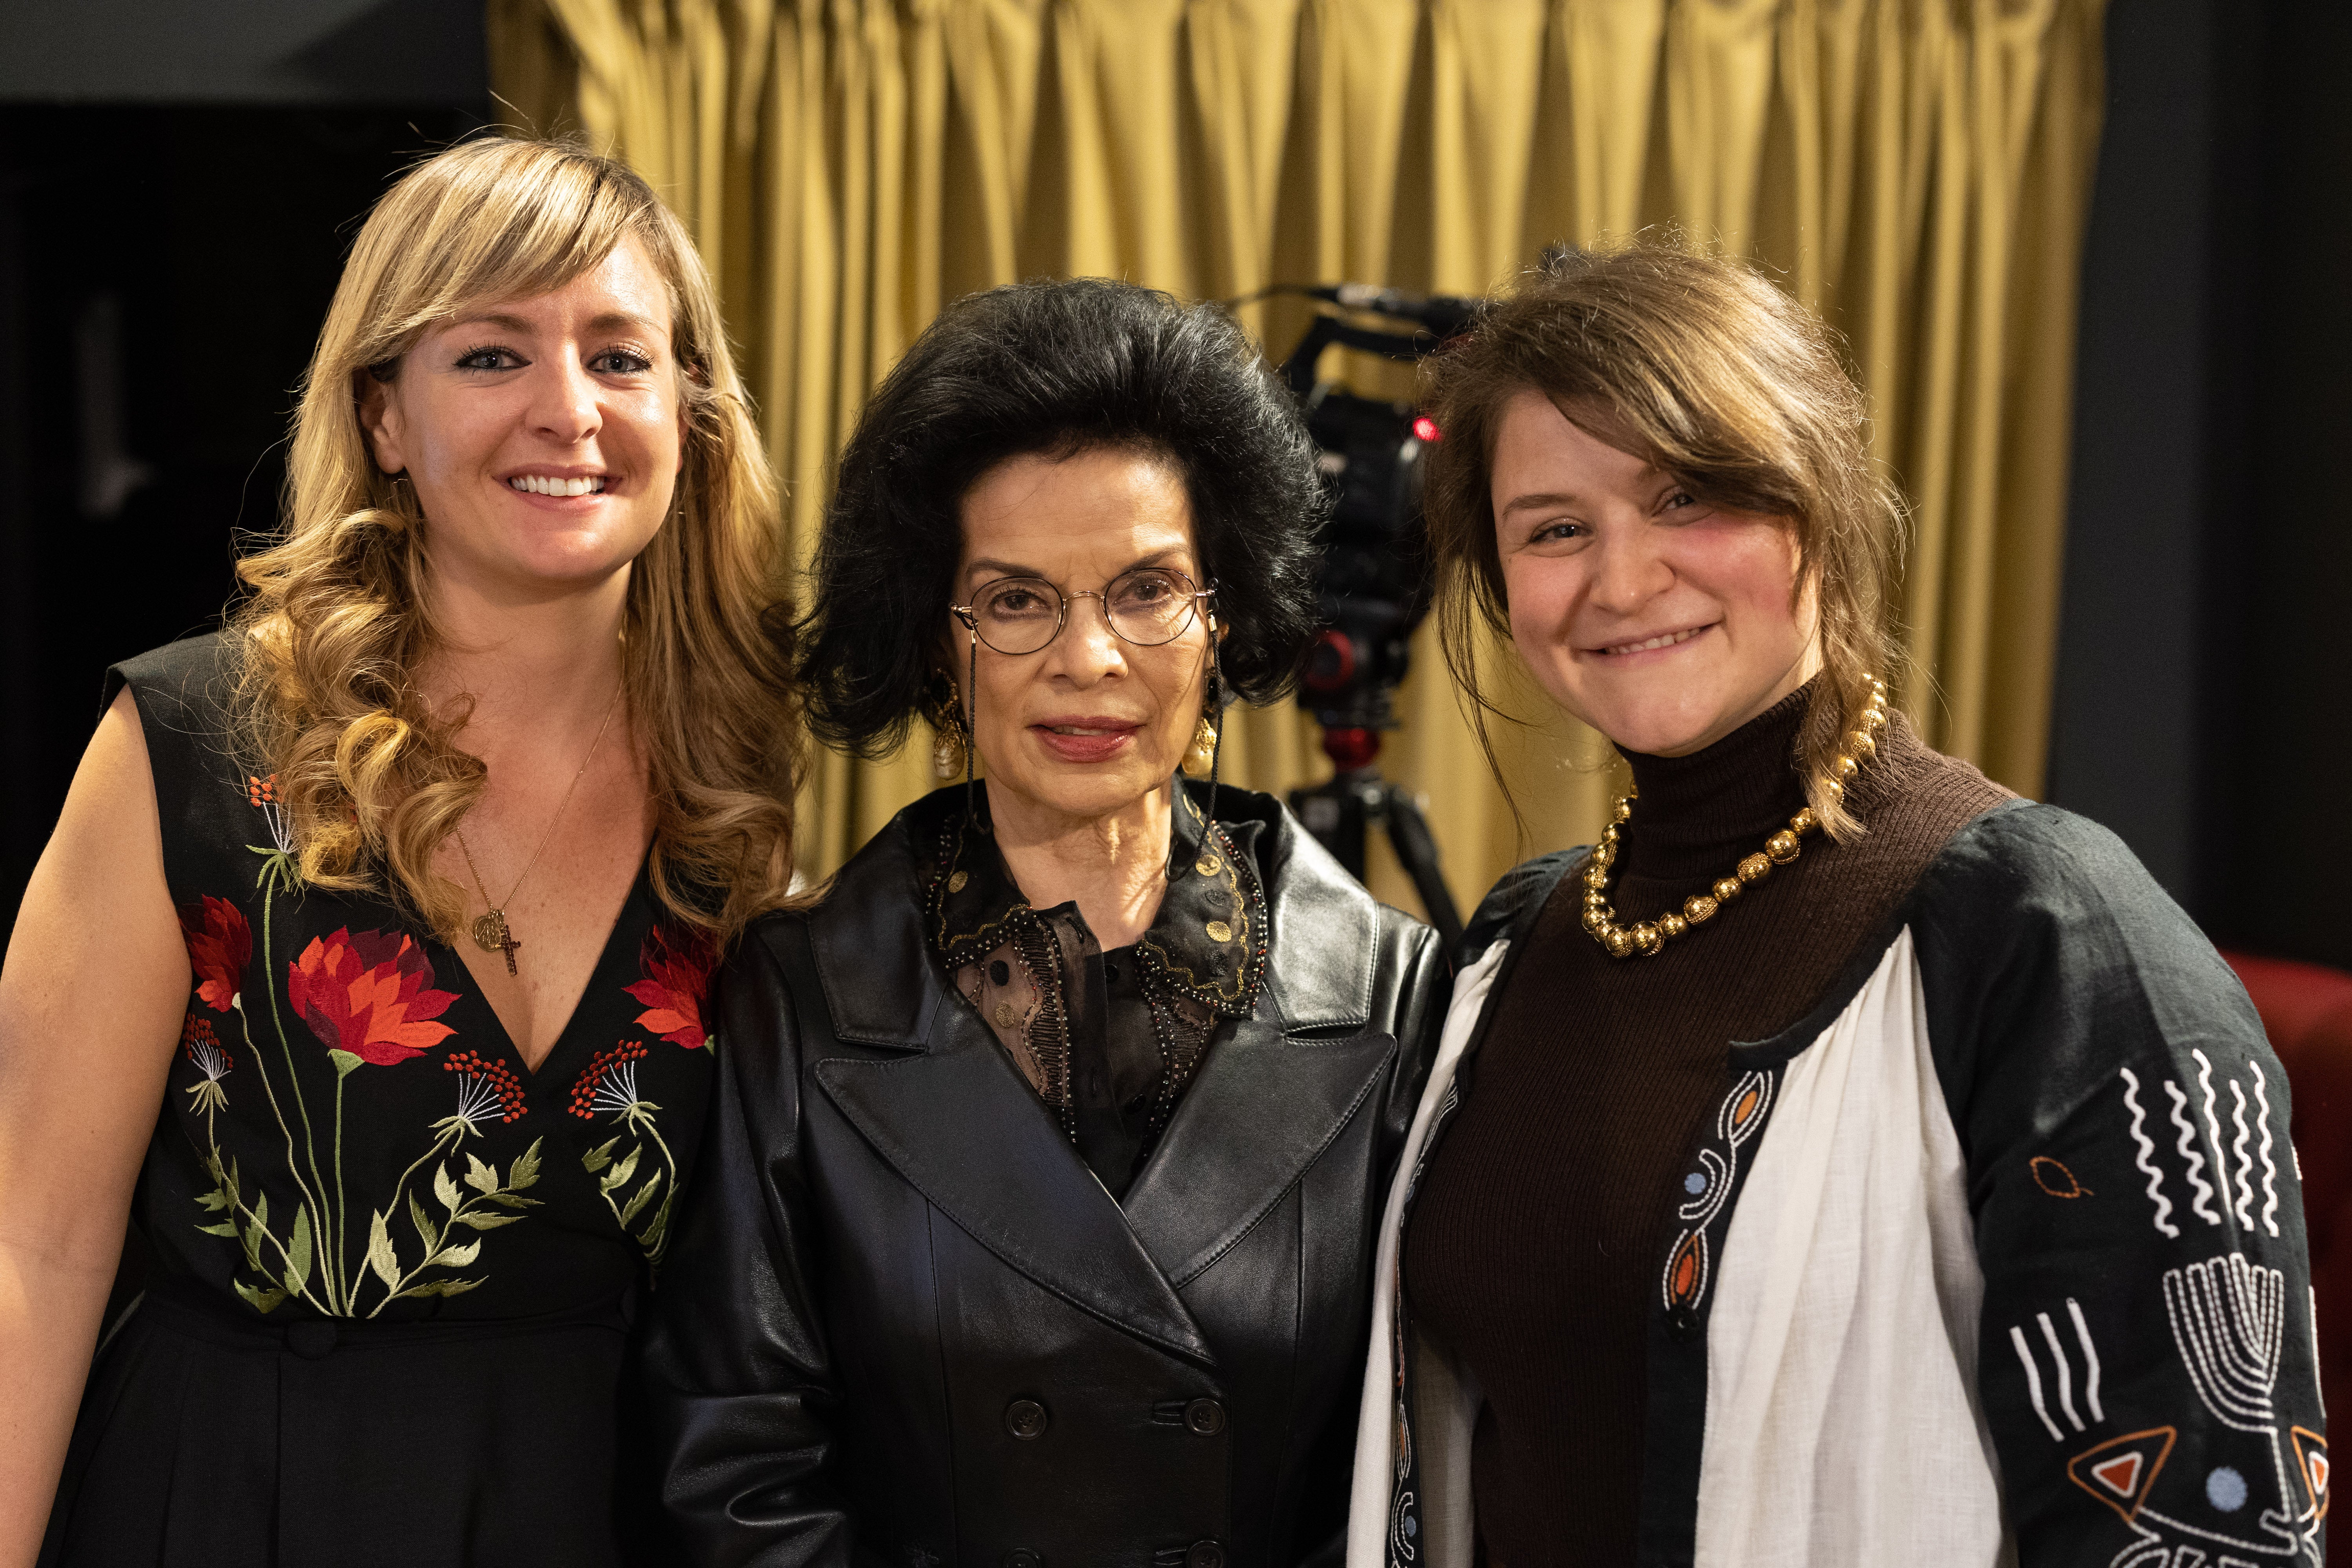 Jagger with Bel Trew (left) and Sasha Romantsova, from the Center for Civil Liberties (right), at the UK screening of Independent TV’s ‘The Body in the Woods’